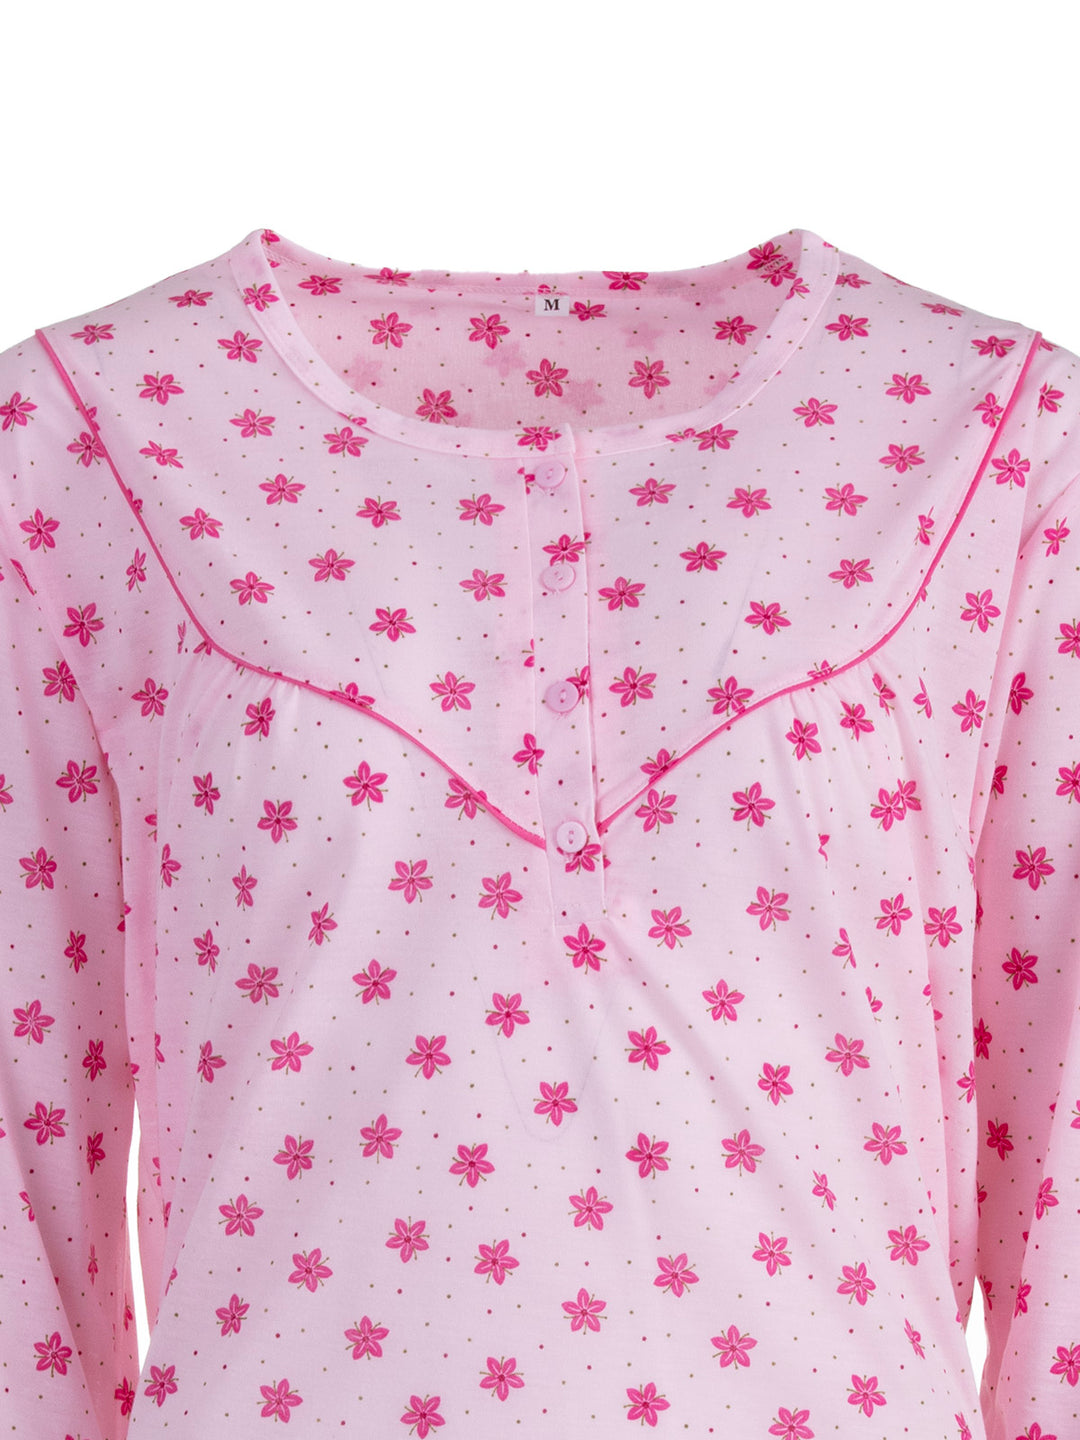 Long-sleeved nightgown - blossoms M-2XL